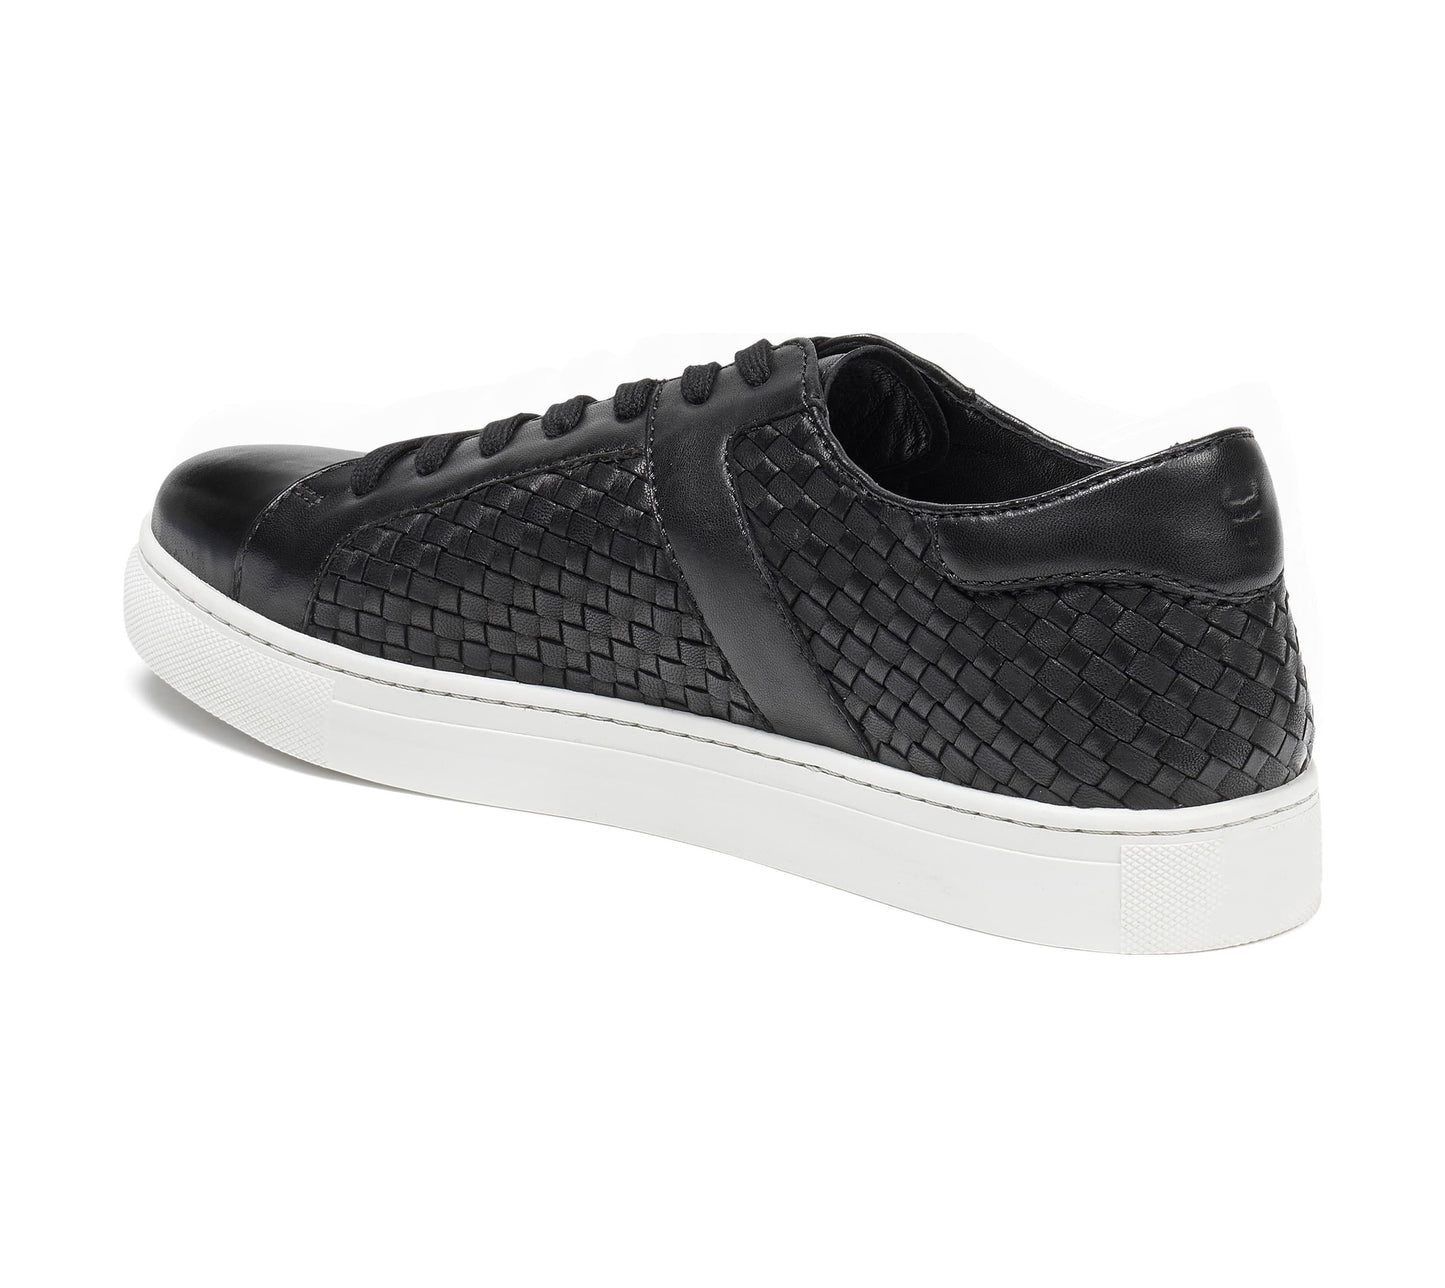 Black Braided Leather Low Top Lace Up Sneaker for Men. White Comfortable Cup Sole.